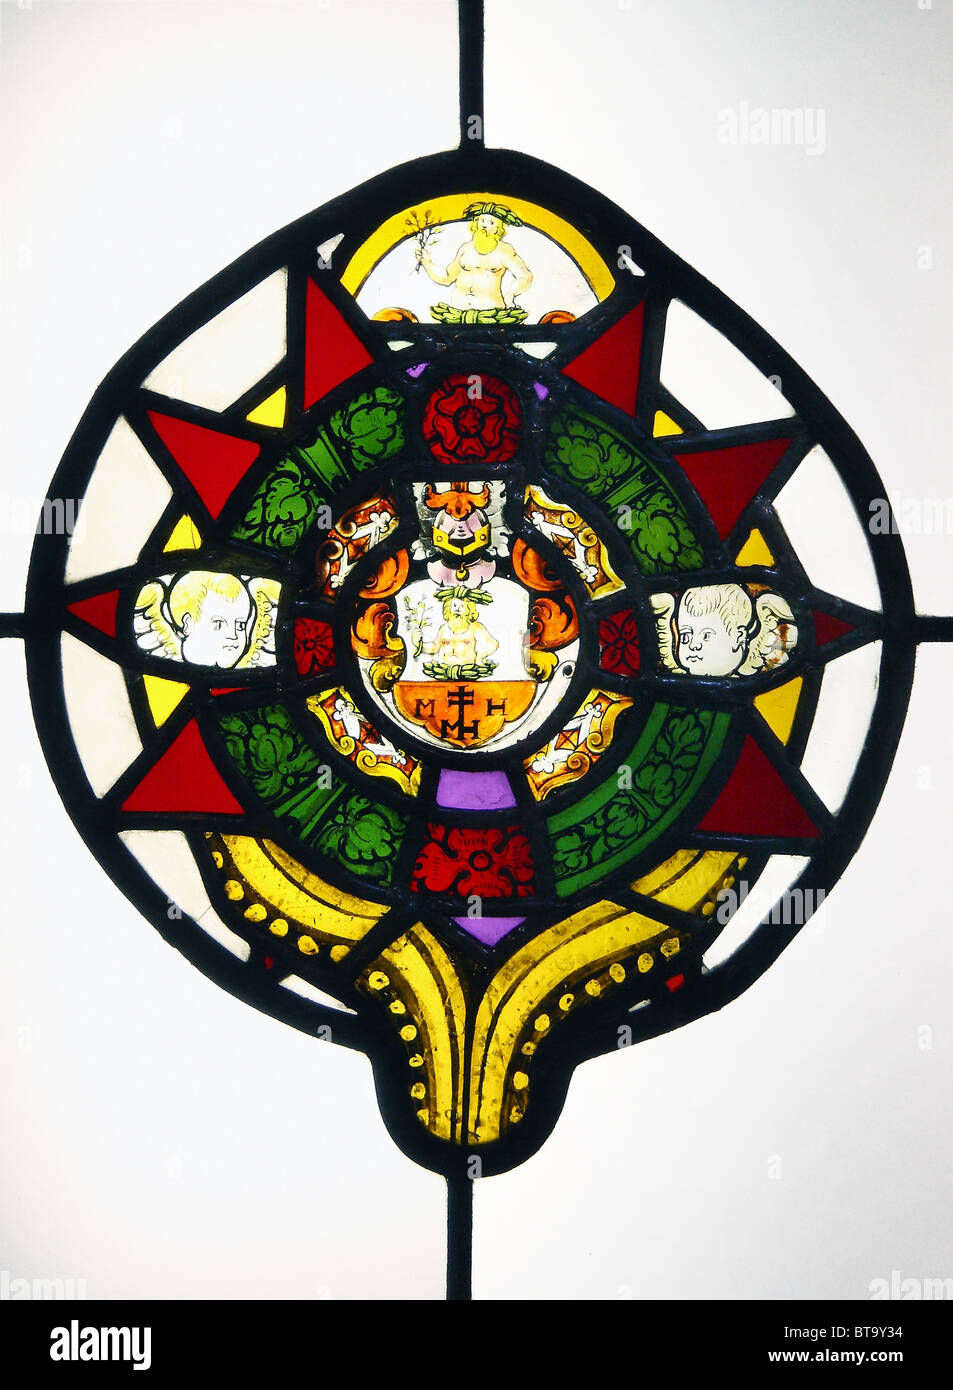 Stained glass roundel with a middle class coat of arms (around 1600). Museum of Architecture, Wroclaw. Stock Photo